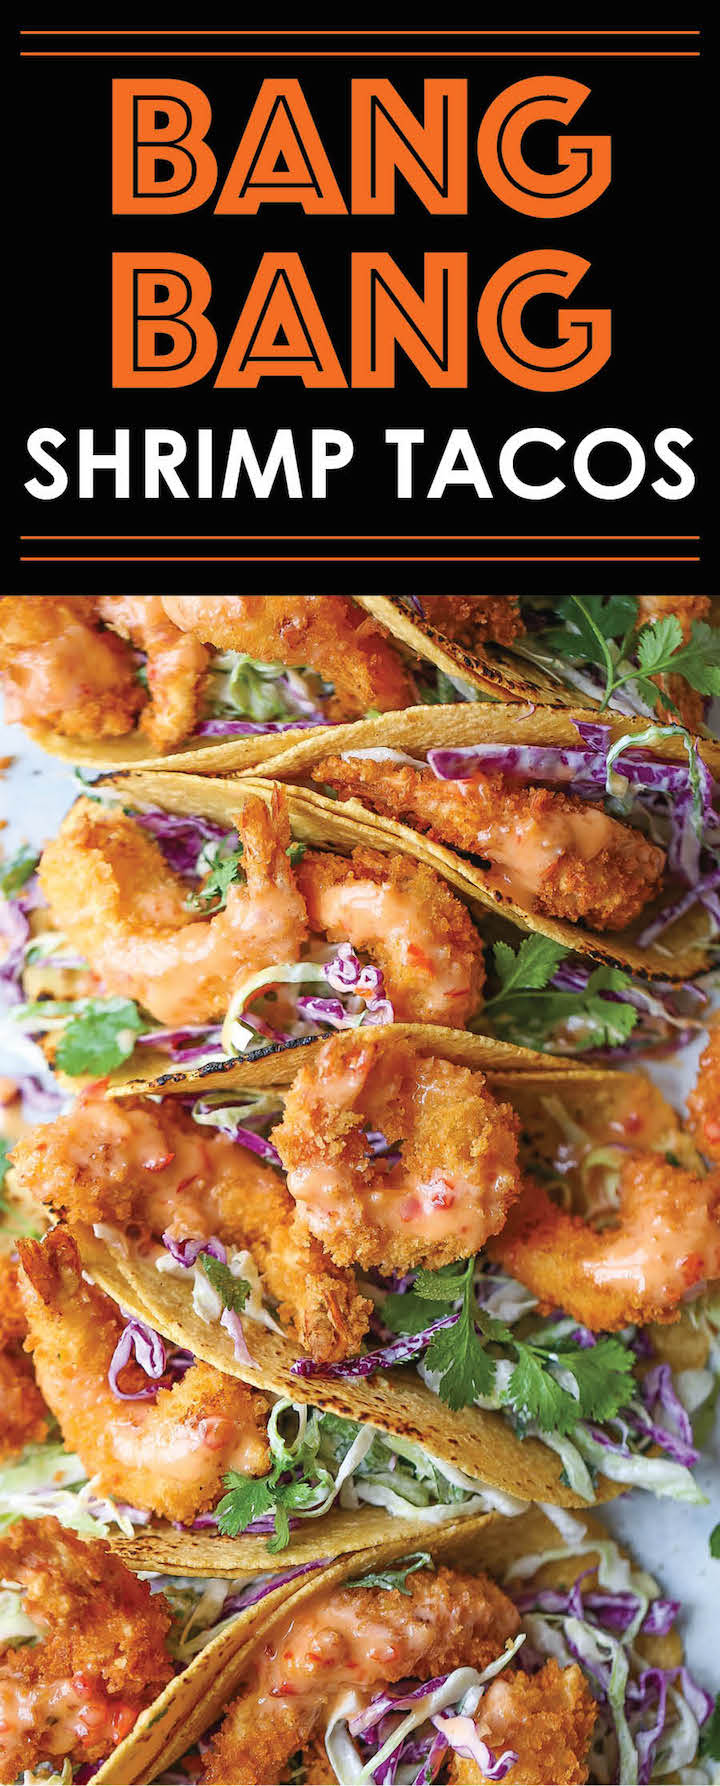 Bang Bang Shrimp Tacos - Super crisp shrimp tacos drizzled with the most amazing and epic sweet creamy chili sauce. It'll be hard to just stop at 1, or 10!